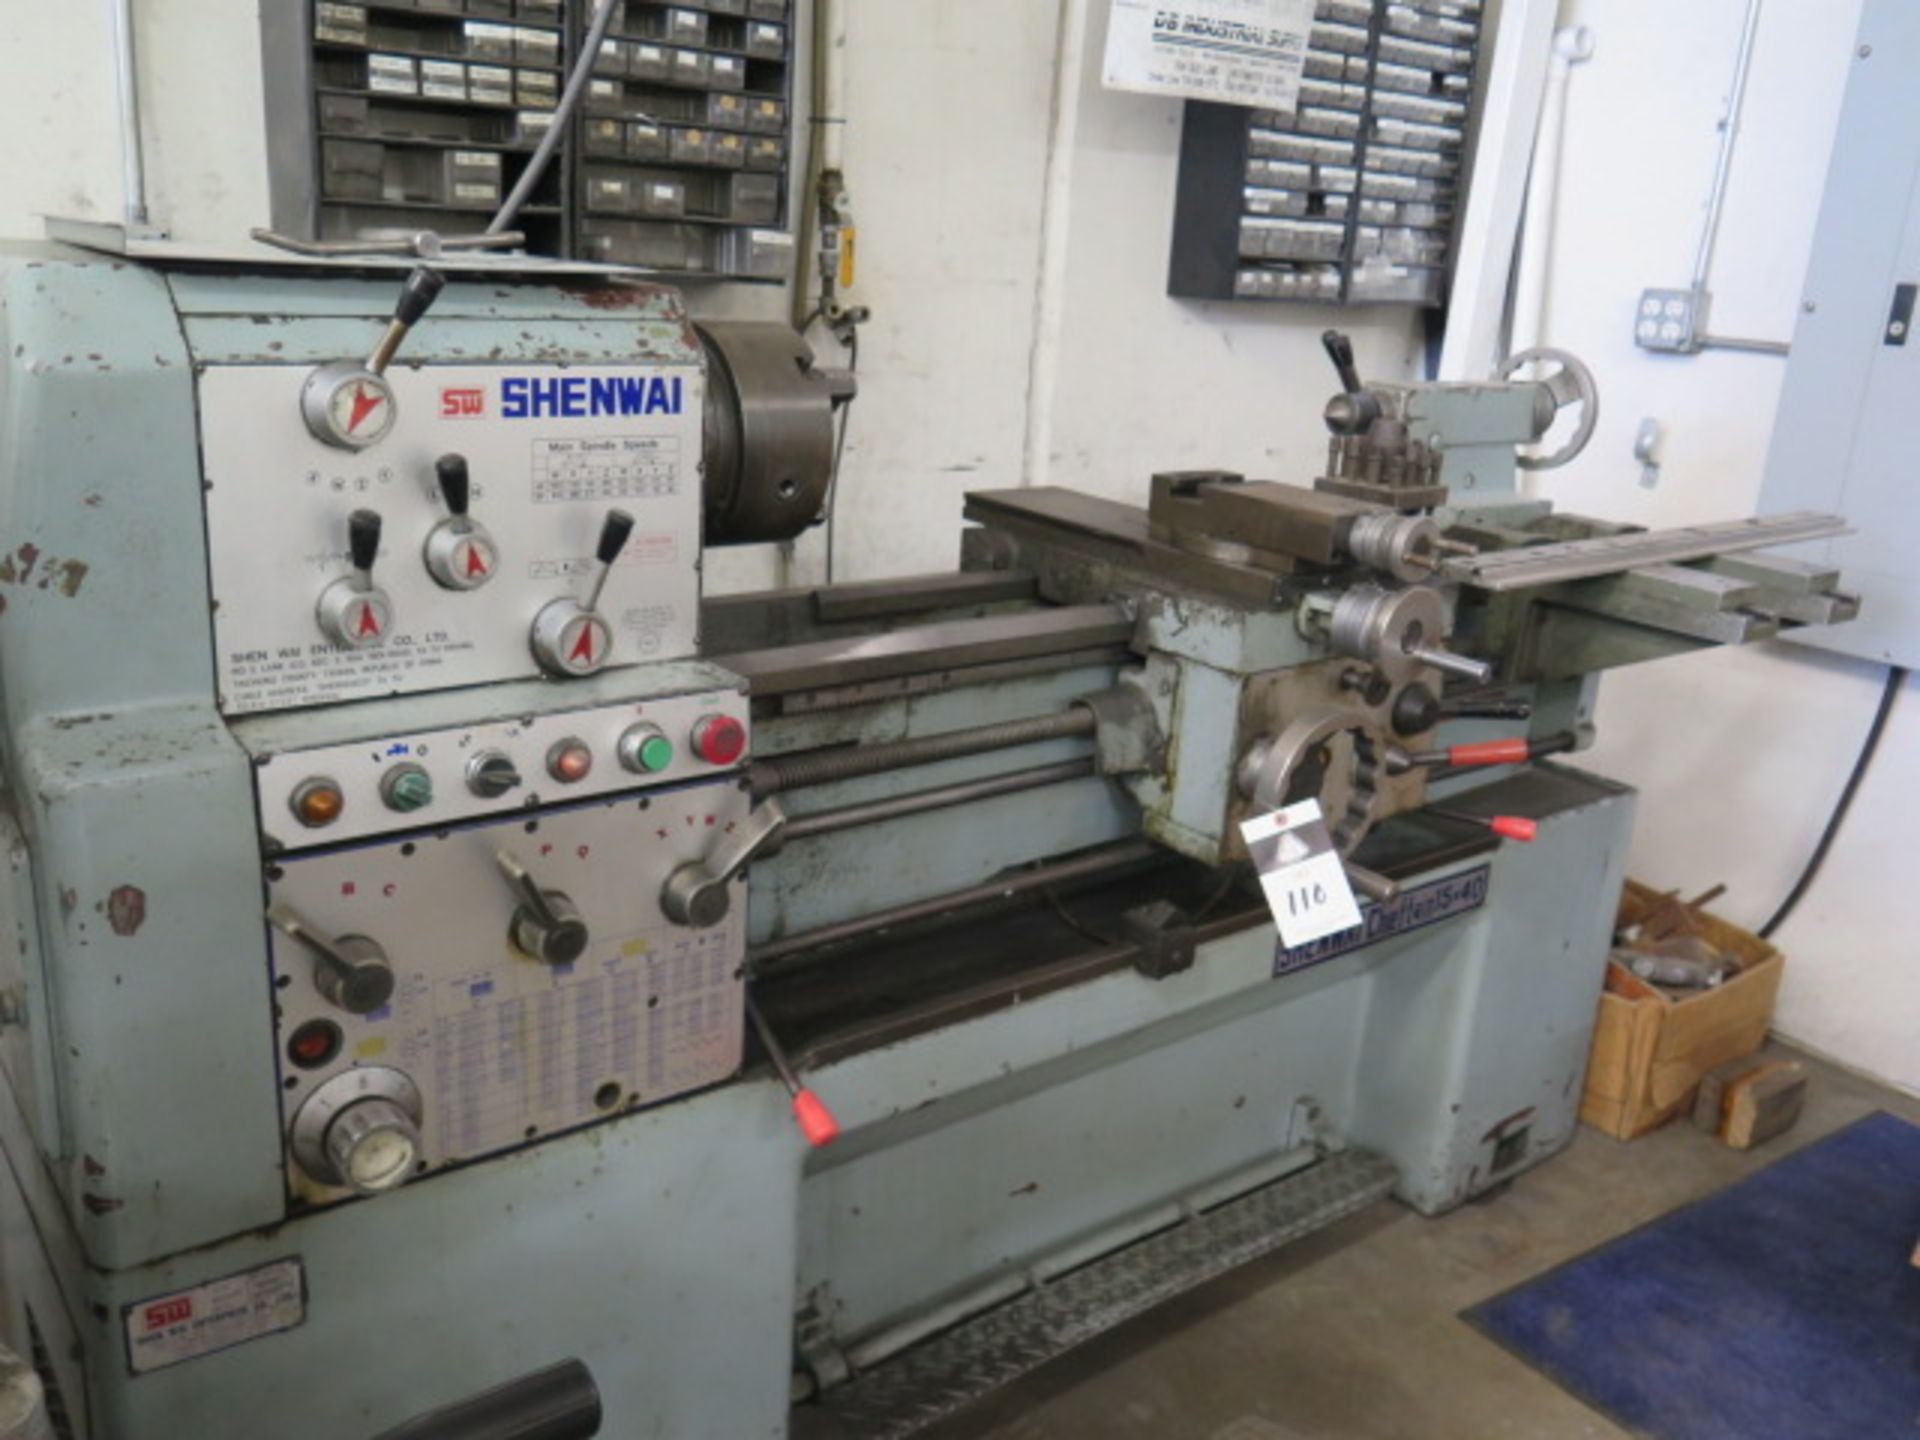 SW Shenwai “Chieftain” 15” x 40” Geared Head Gap Lathe s/n 10449 w/ 40-1800 RPM, Inch/mm, SOLD AS IS - Image 2 of 12